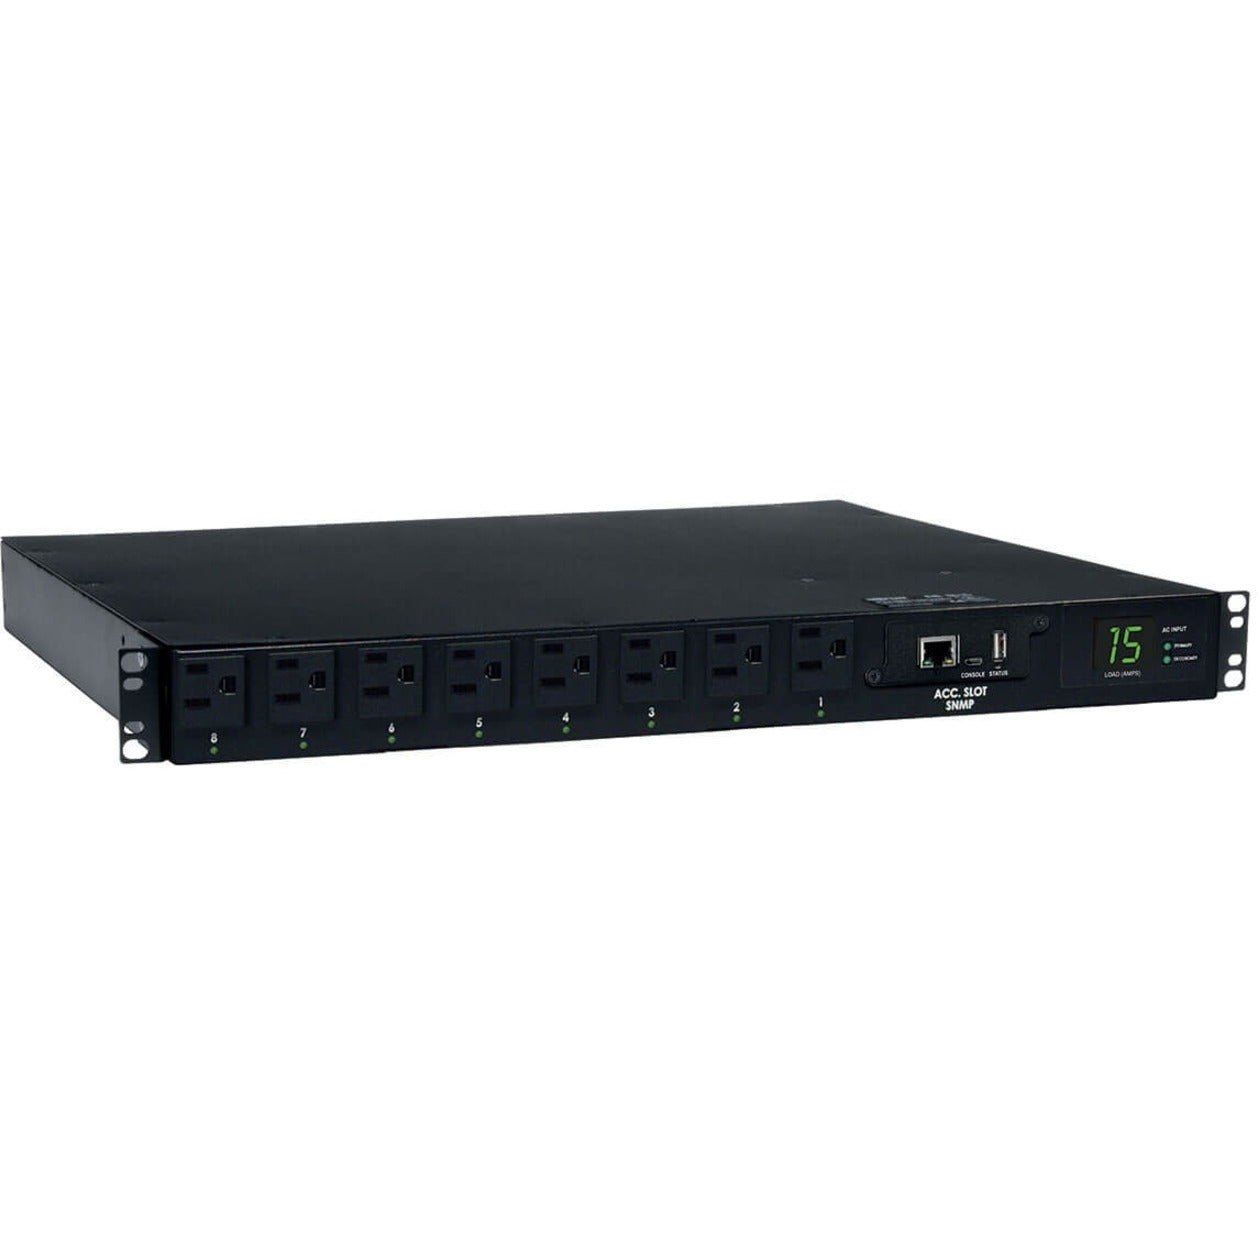 Tripp Lite PDUMH15ATNET PDU Switched ATS 120V 15A 8 Outlet, Integrated Automatic Transfer Switch, Web/Network Monitoring and Control